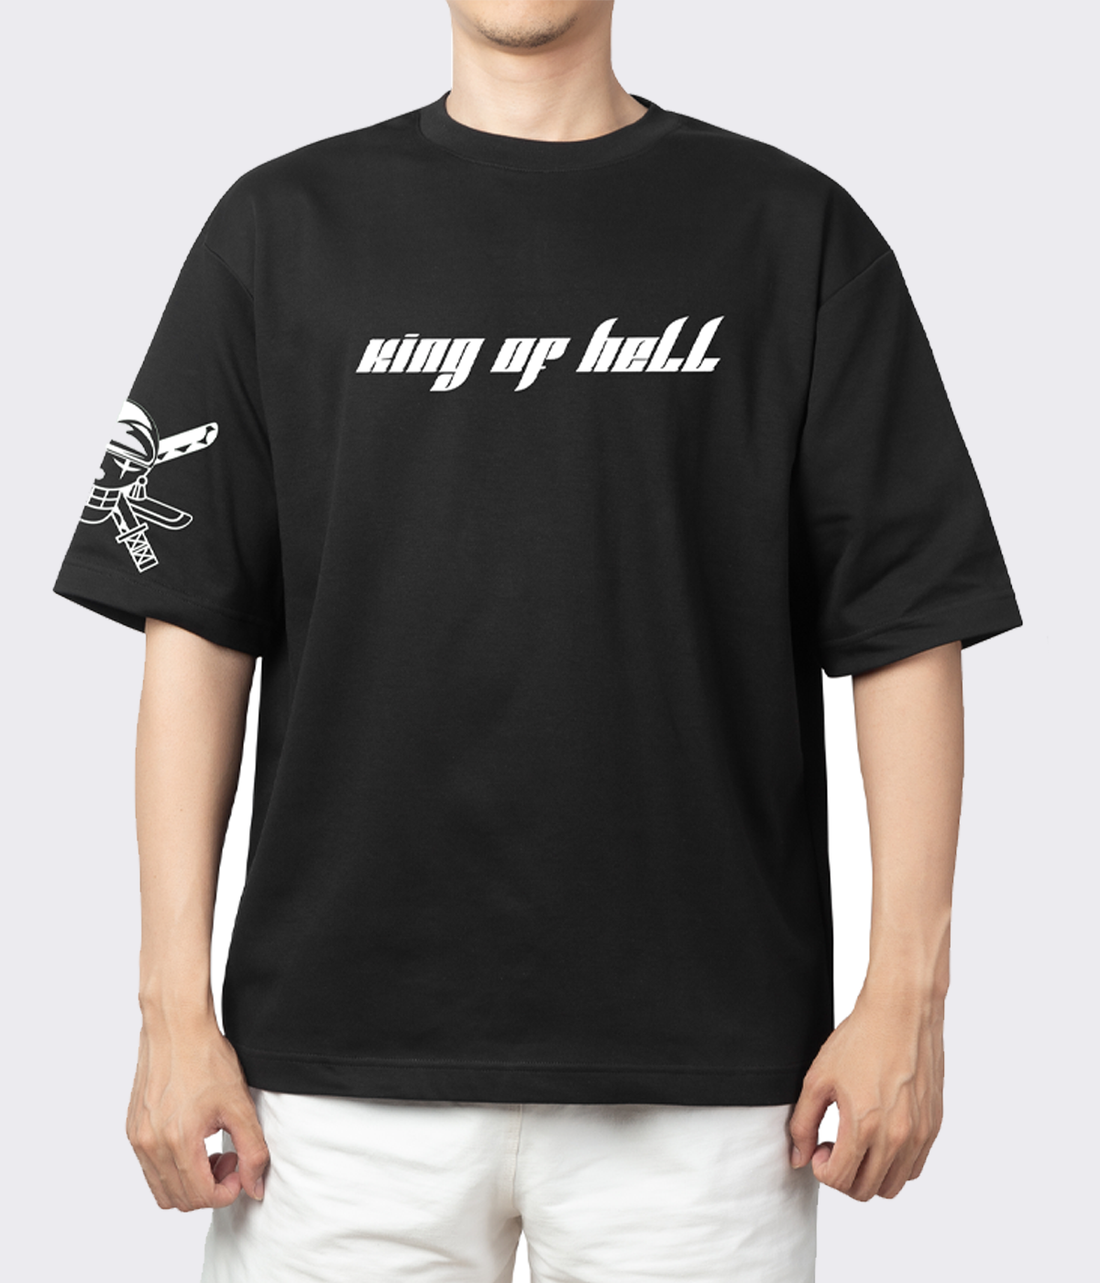 King of Hell Oversize Reflective T-shirt